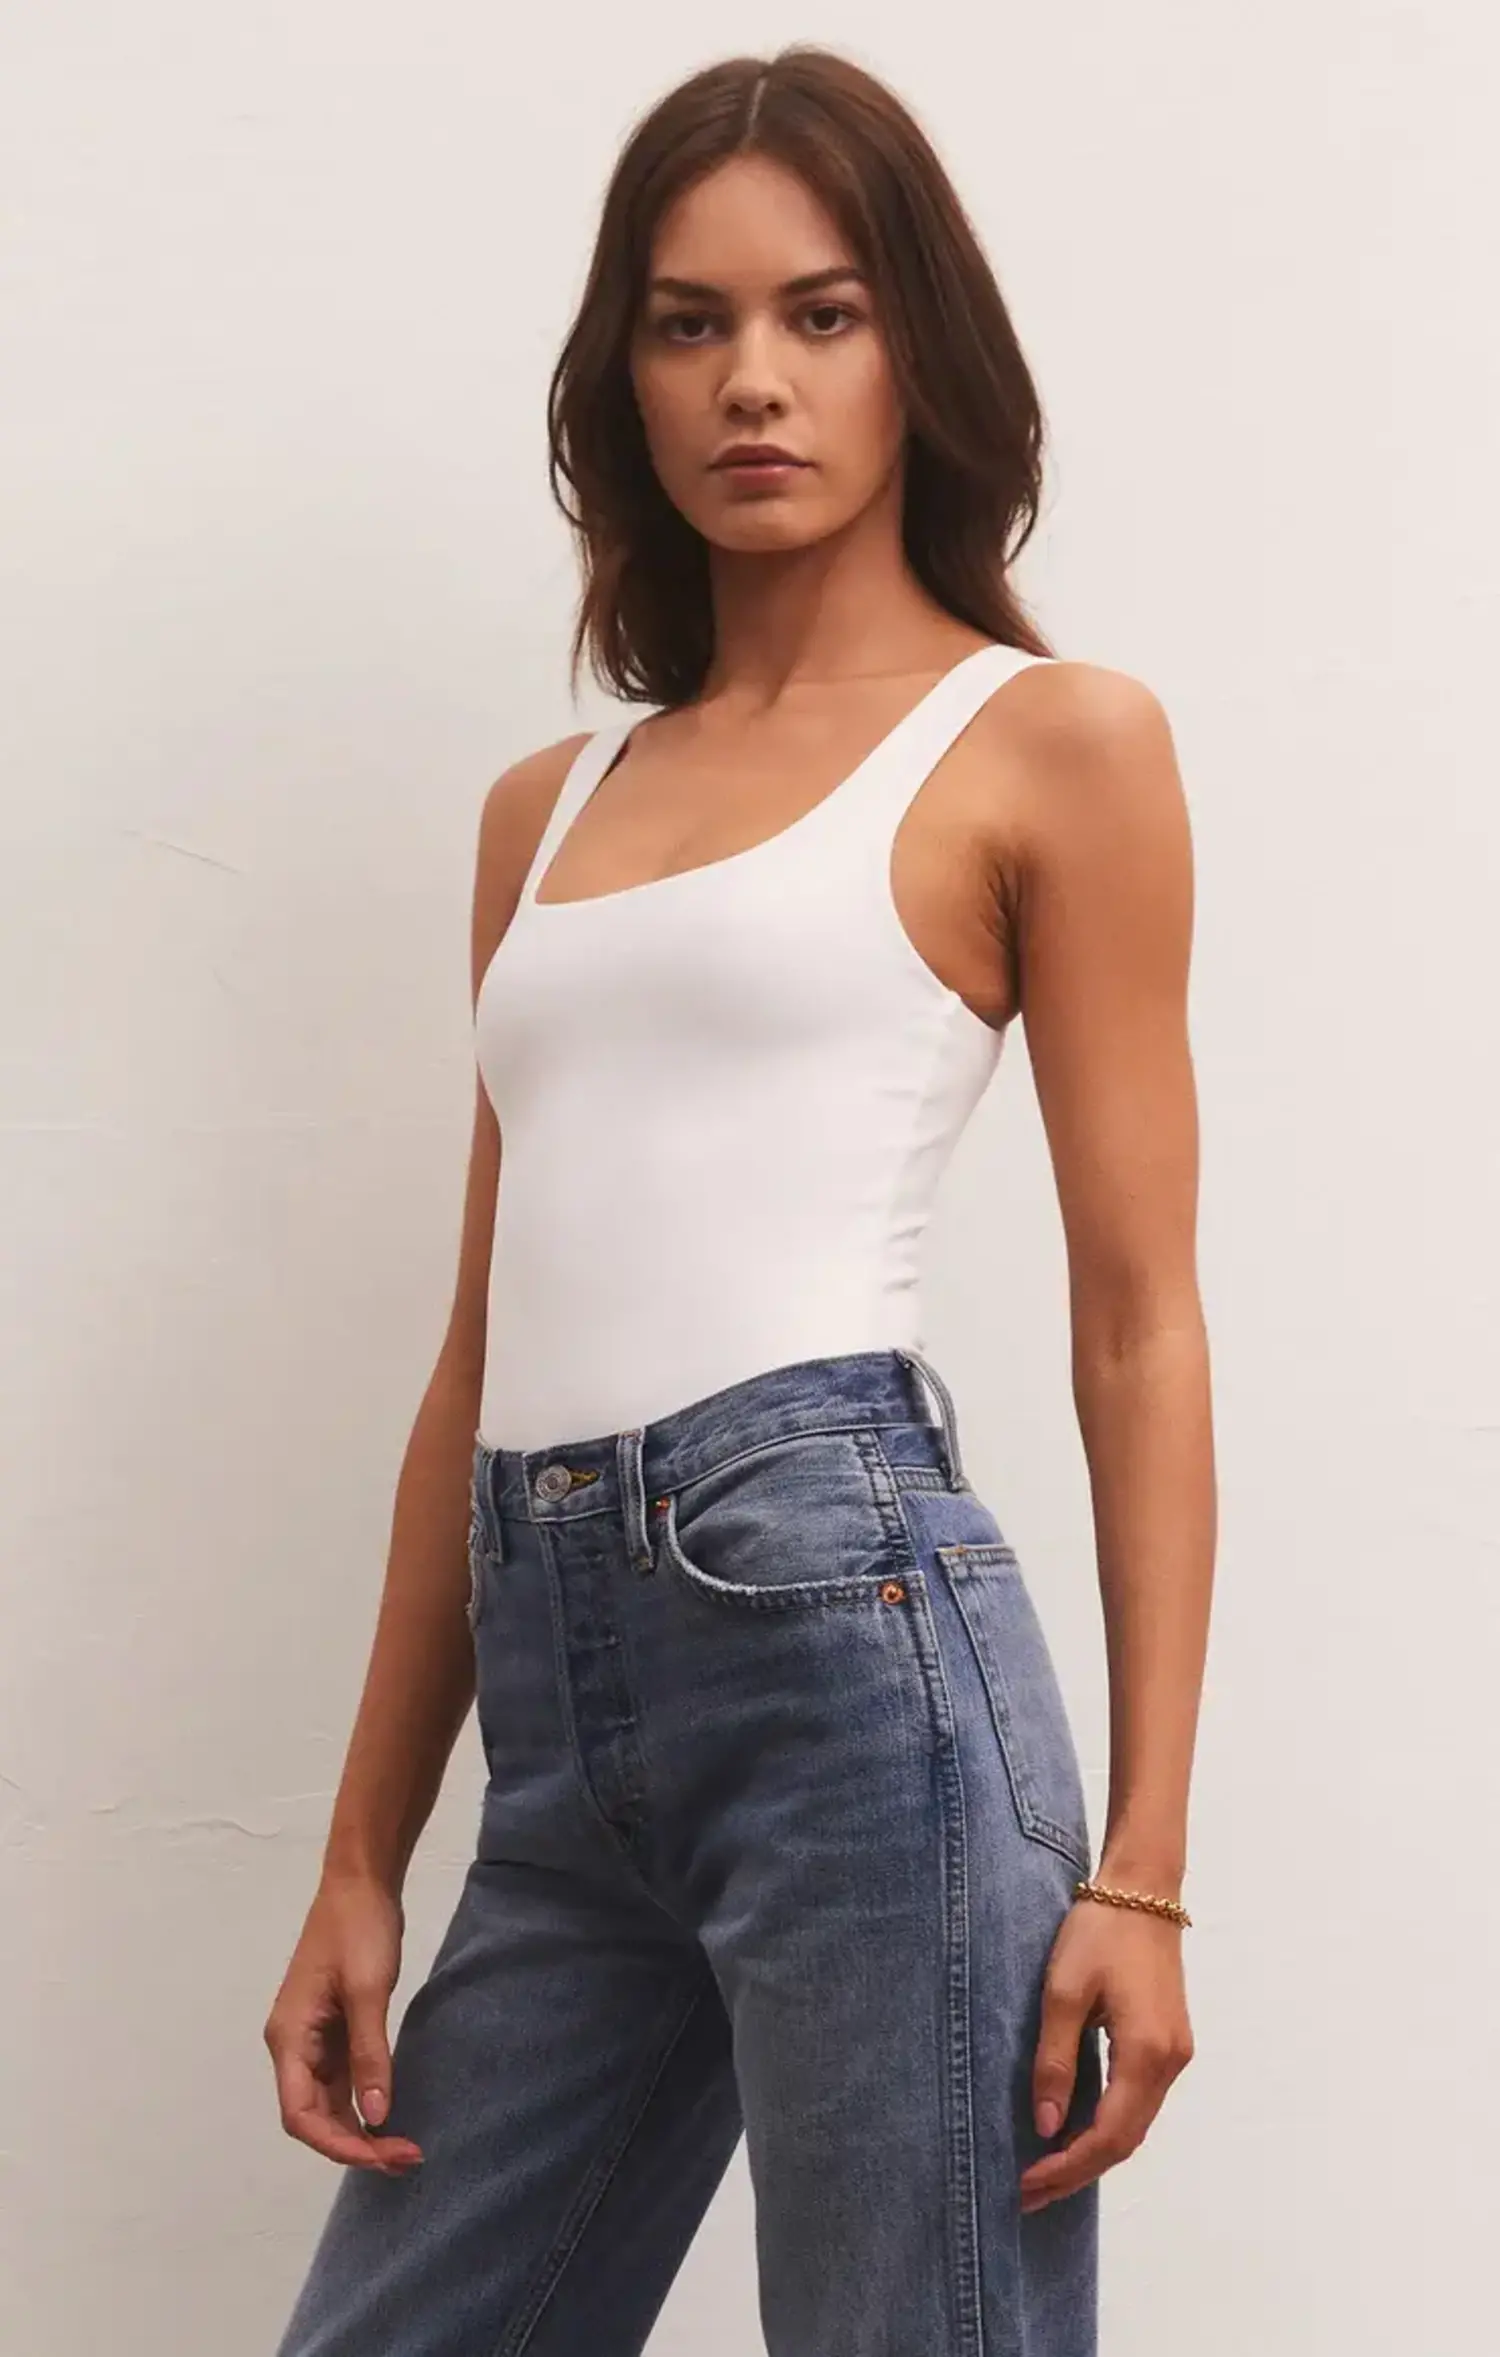 ZSupply  Alana So Smooth Bodysuit White - Tryst Boutique